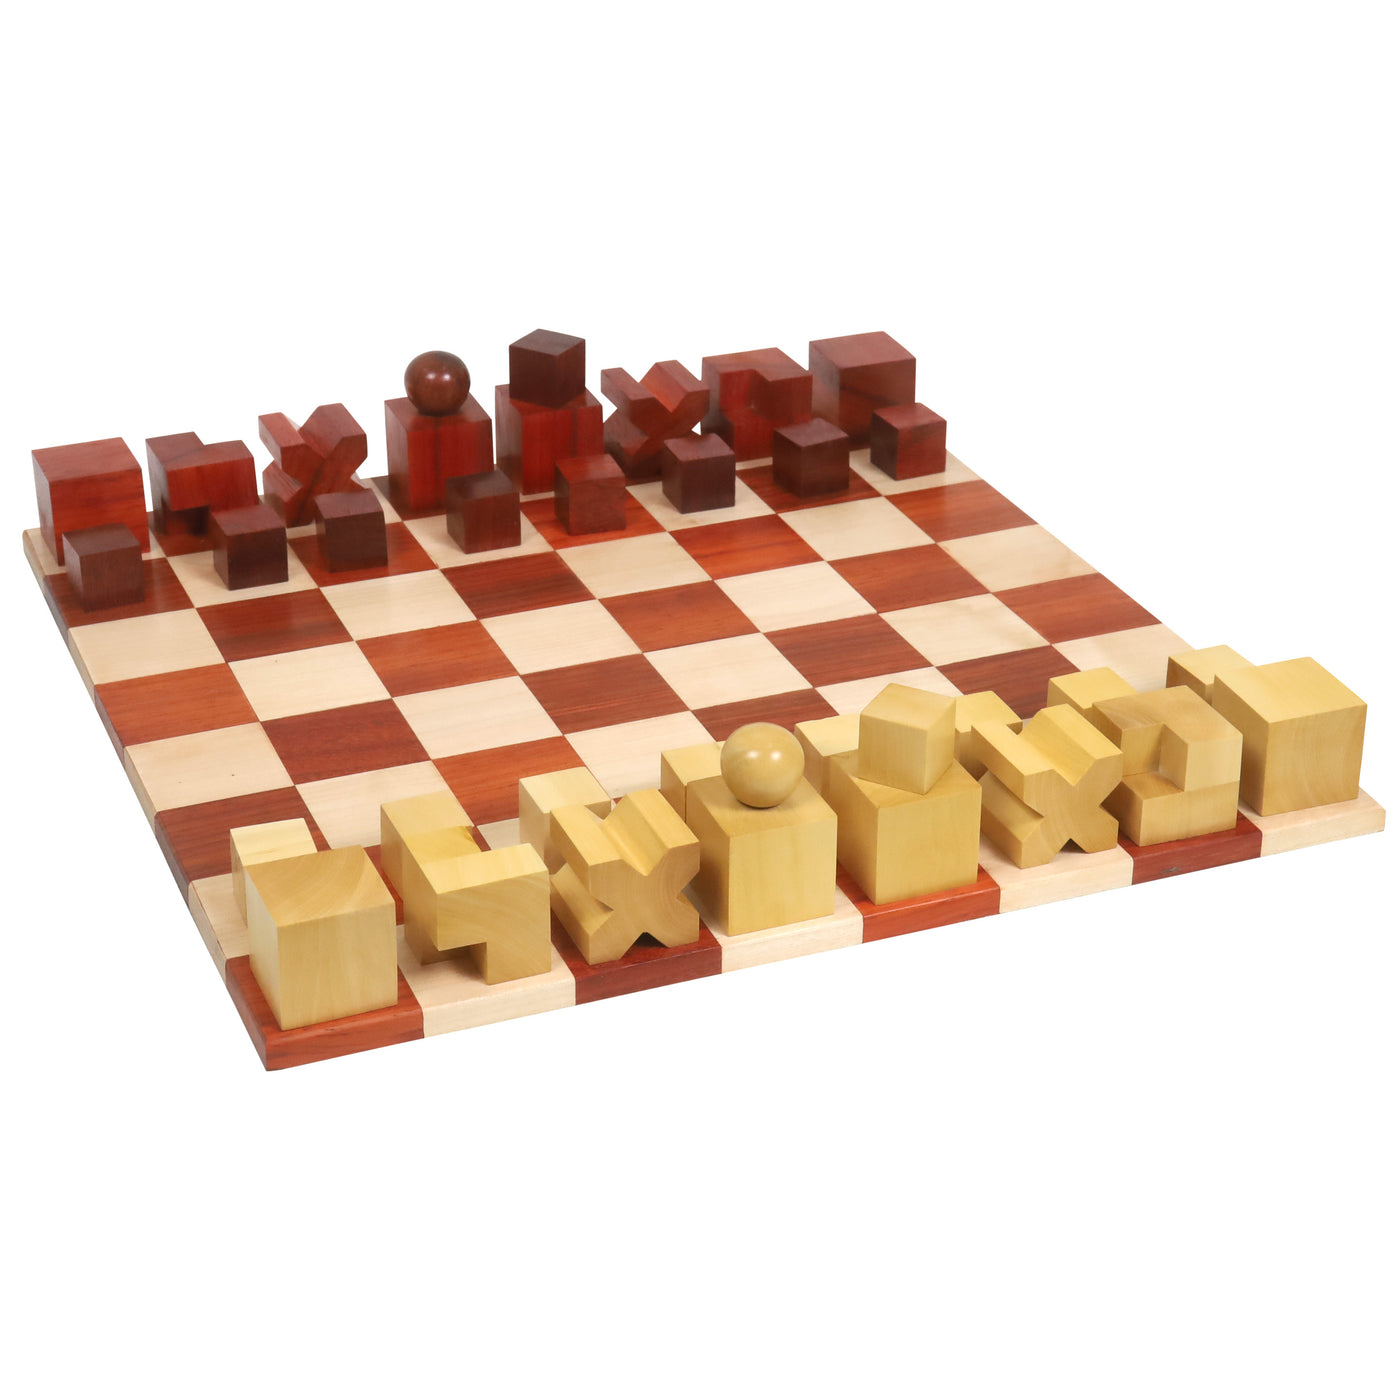 Reproduced 1923 Bauhaus chess pieces Only set - Bud Rosewood & Boxwood - 2" King